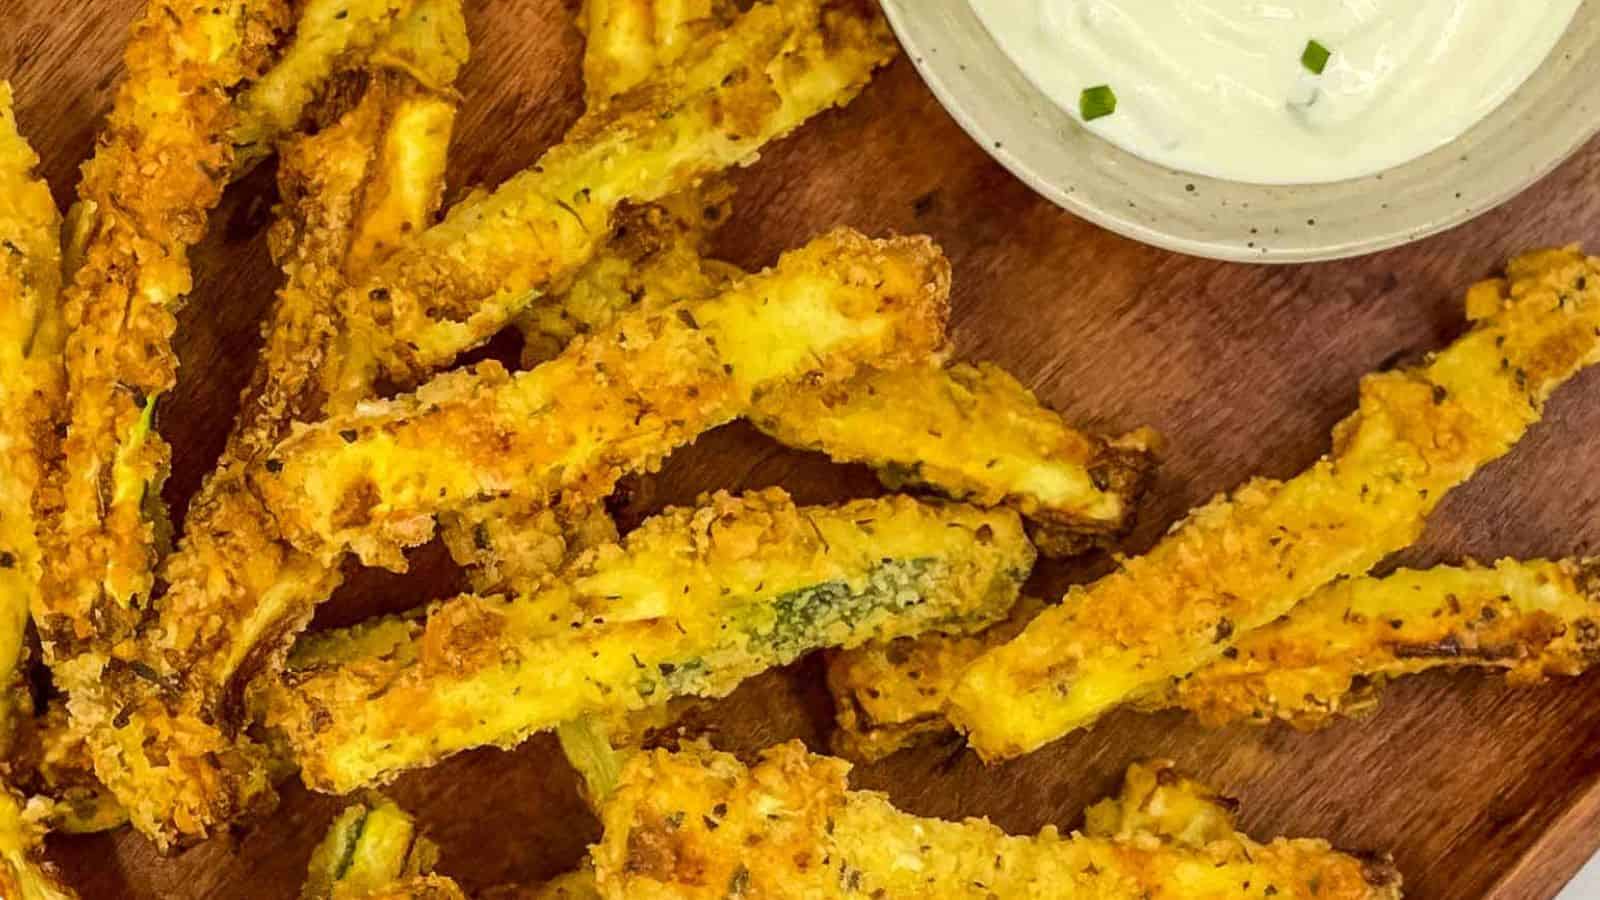 Air fryer zucchini fries on a wooden board.